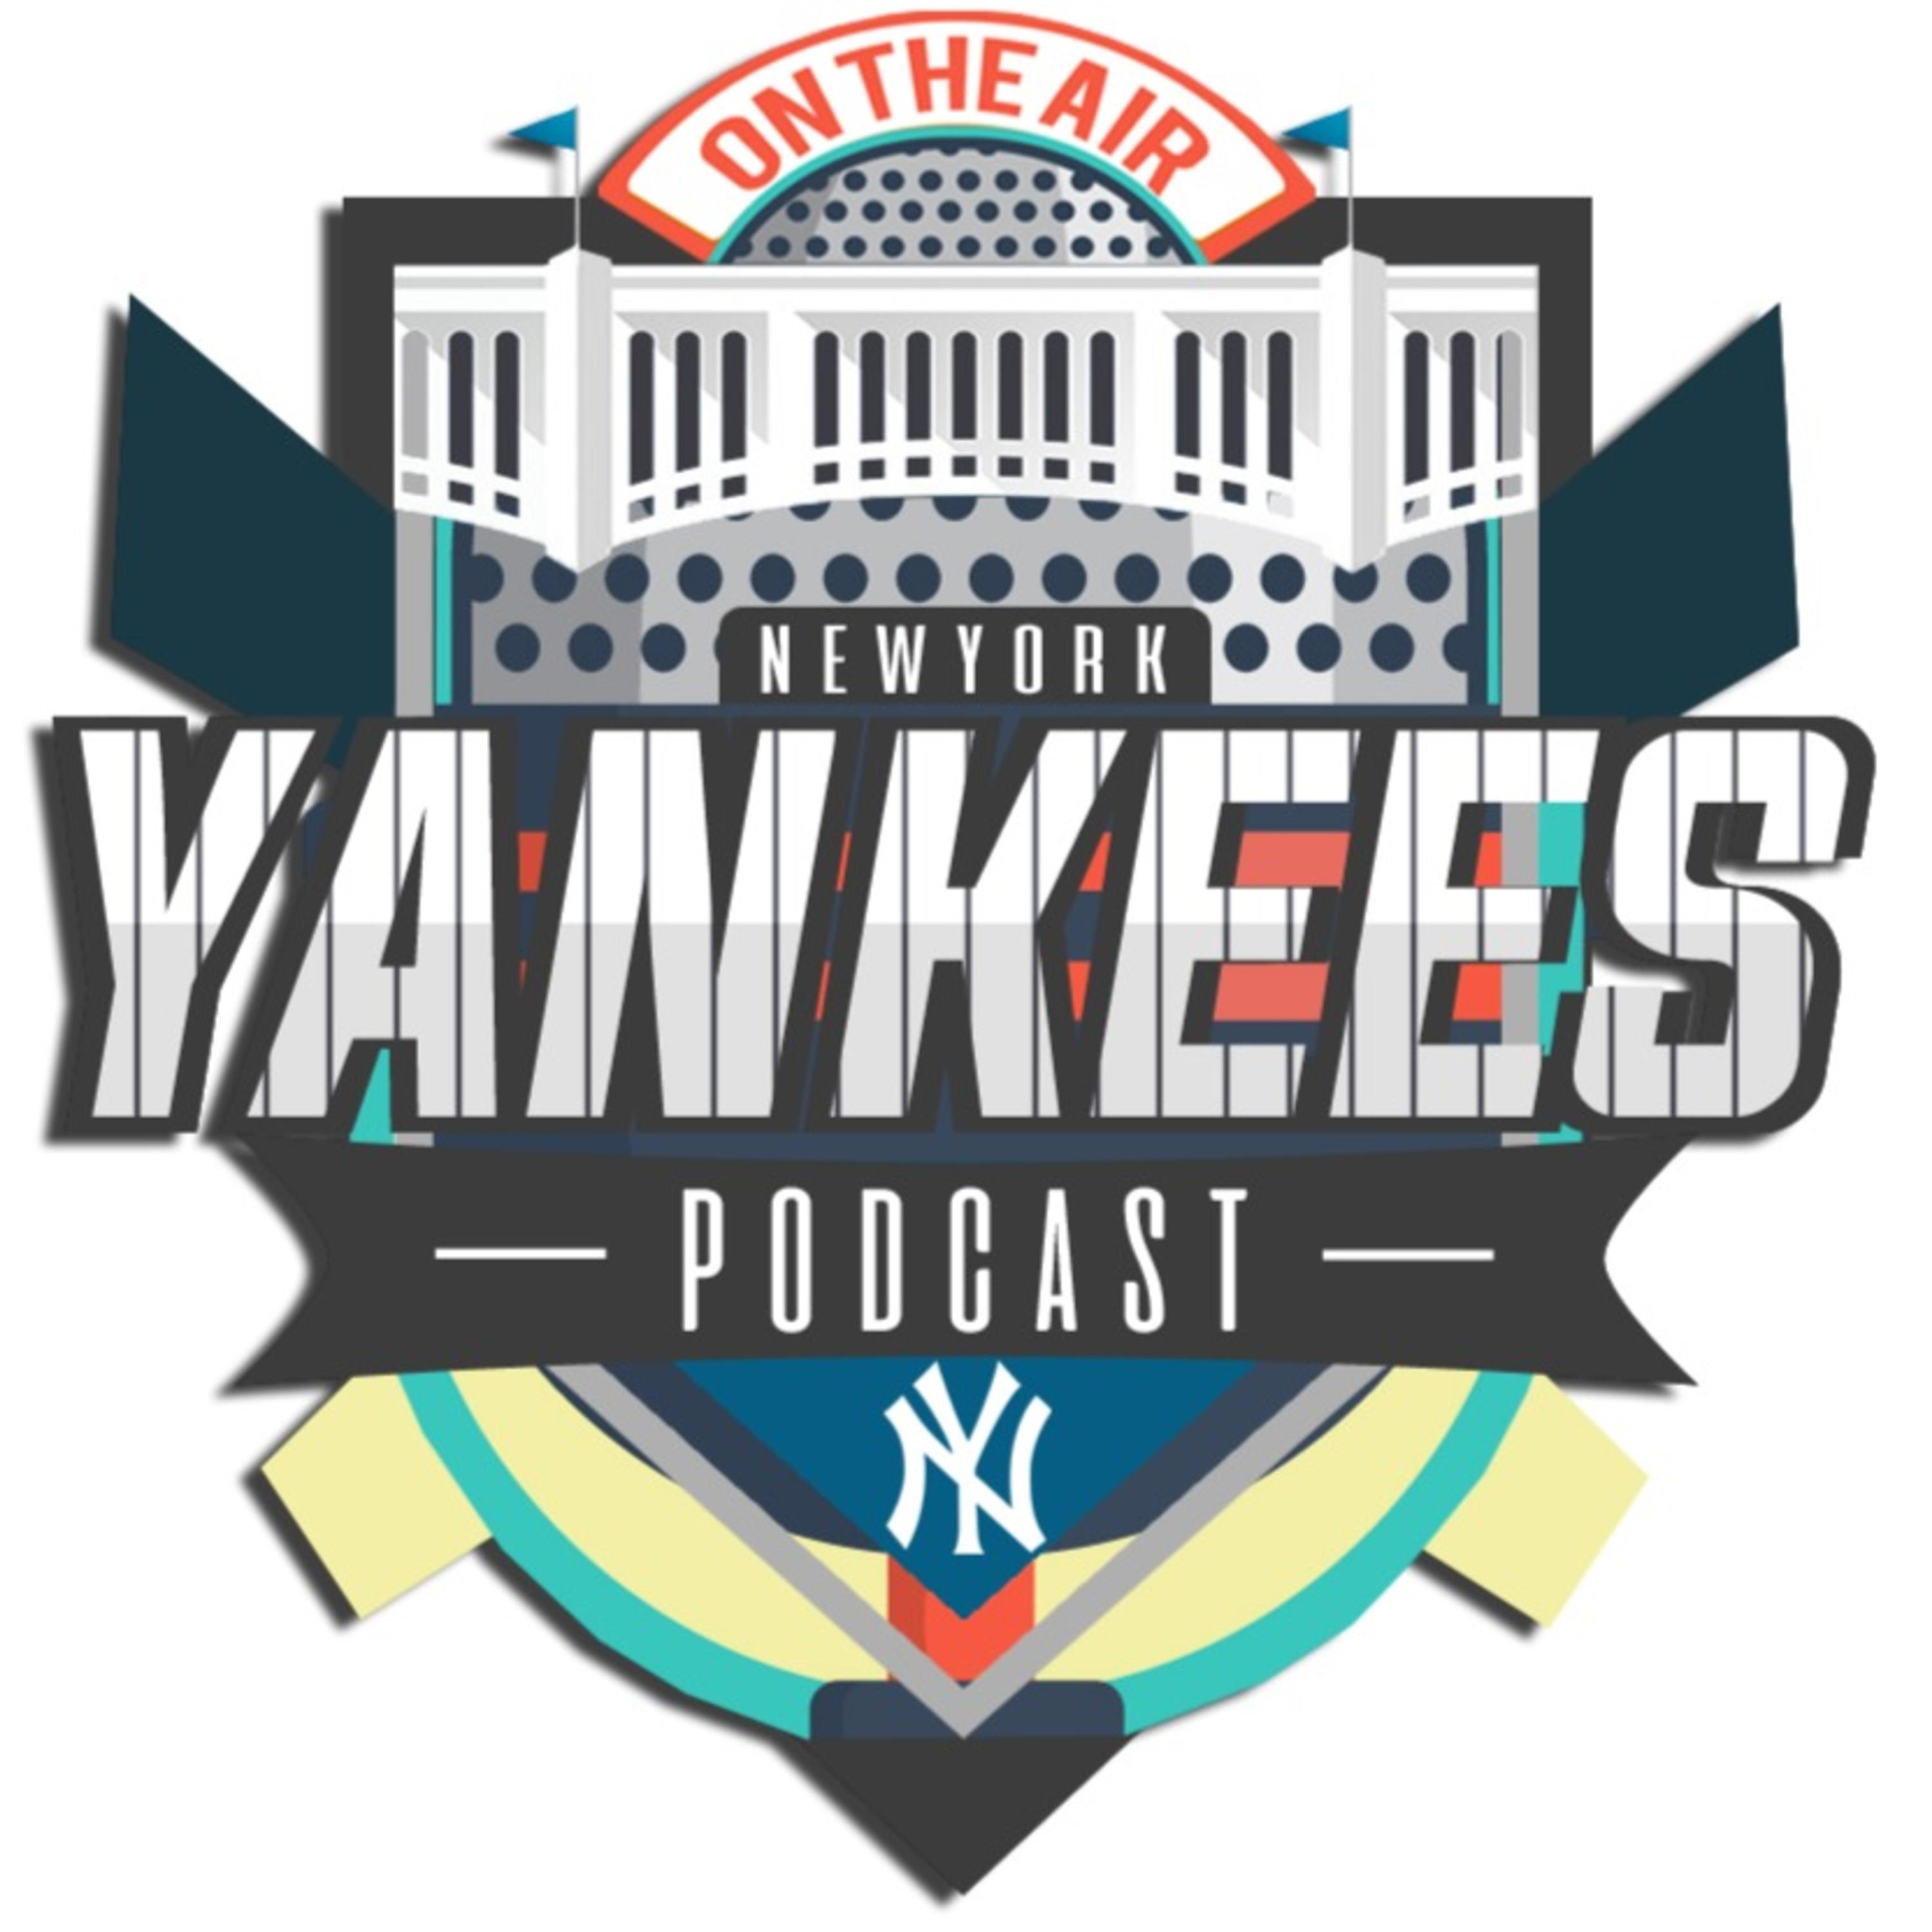 New York Yankees Hungary Podcast - Bé x DS! x Mike - S02EP01